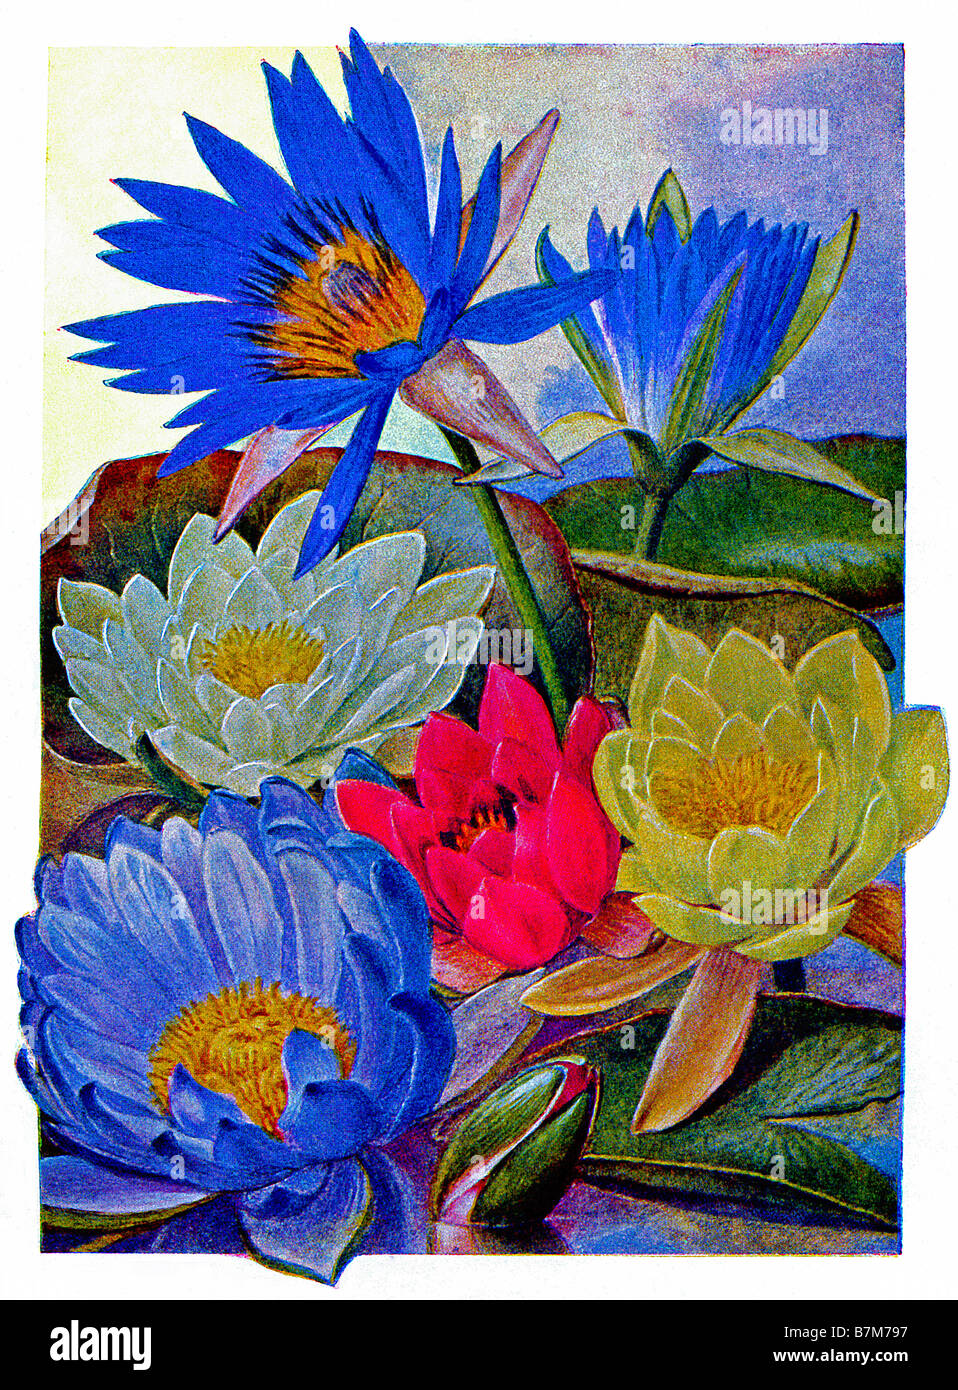 illustration of water lilies Stock Photo